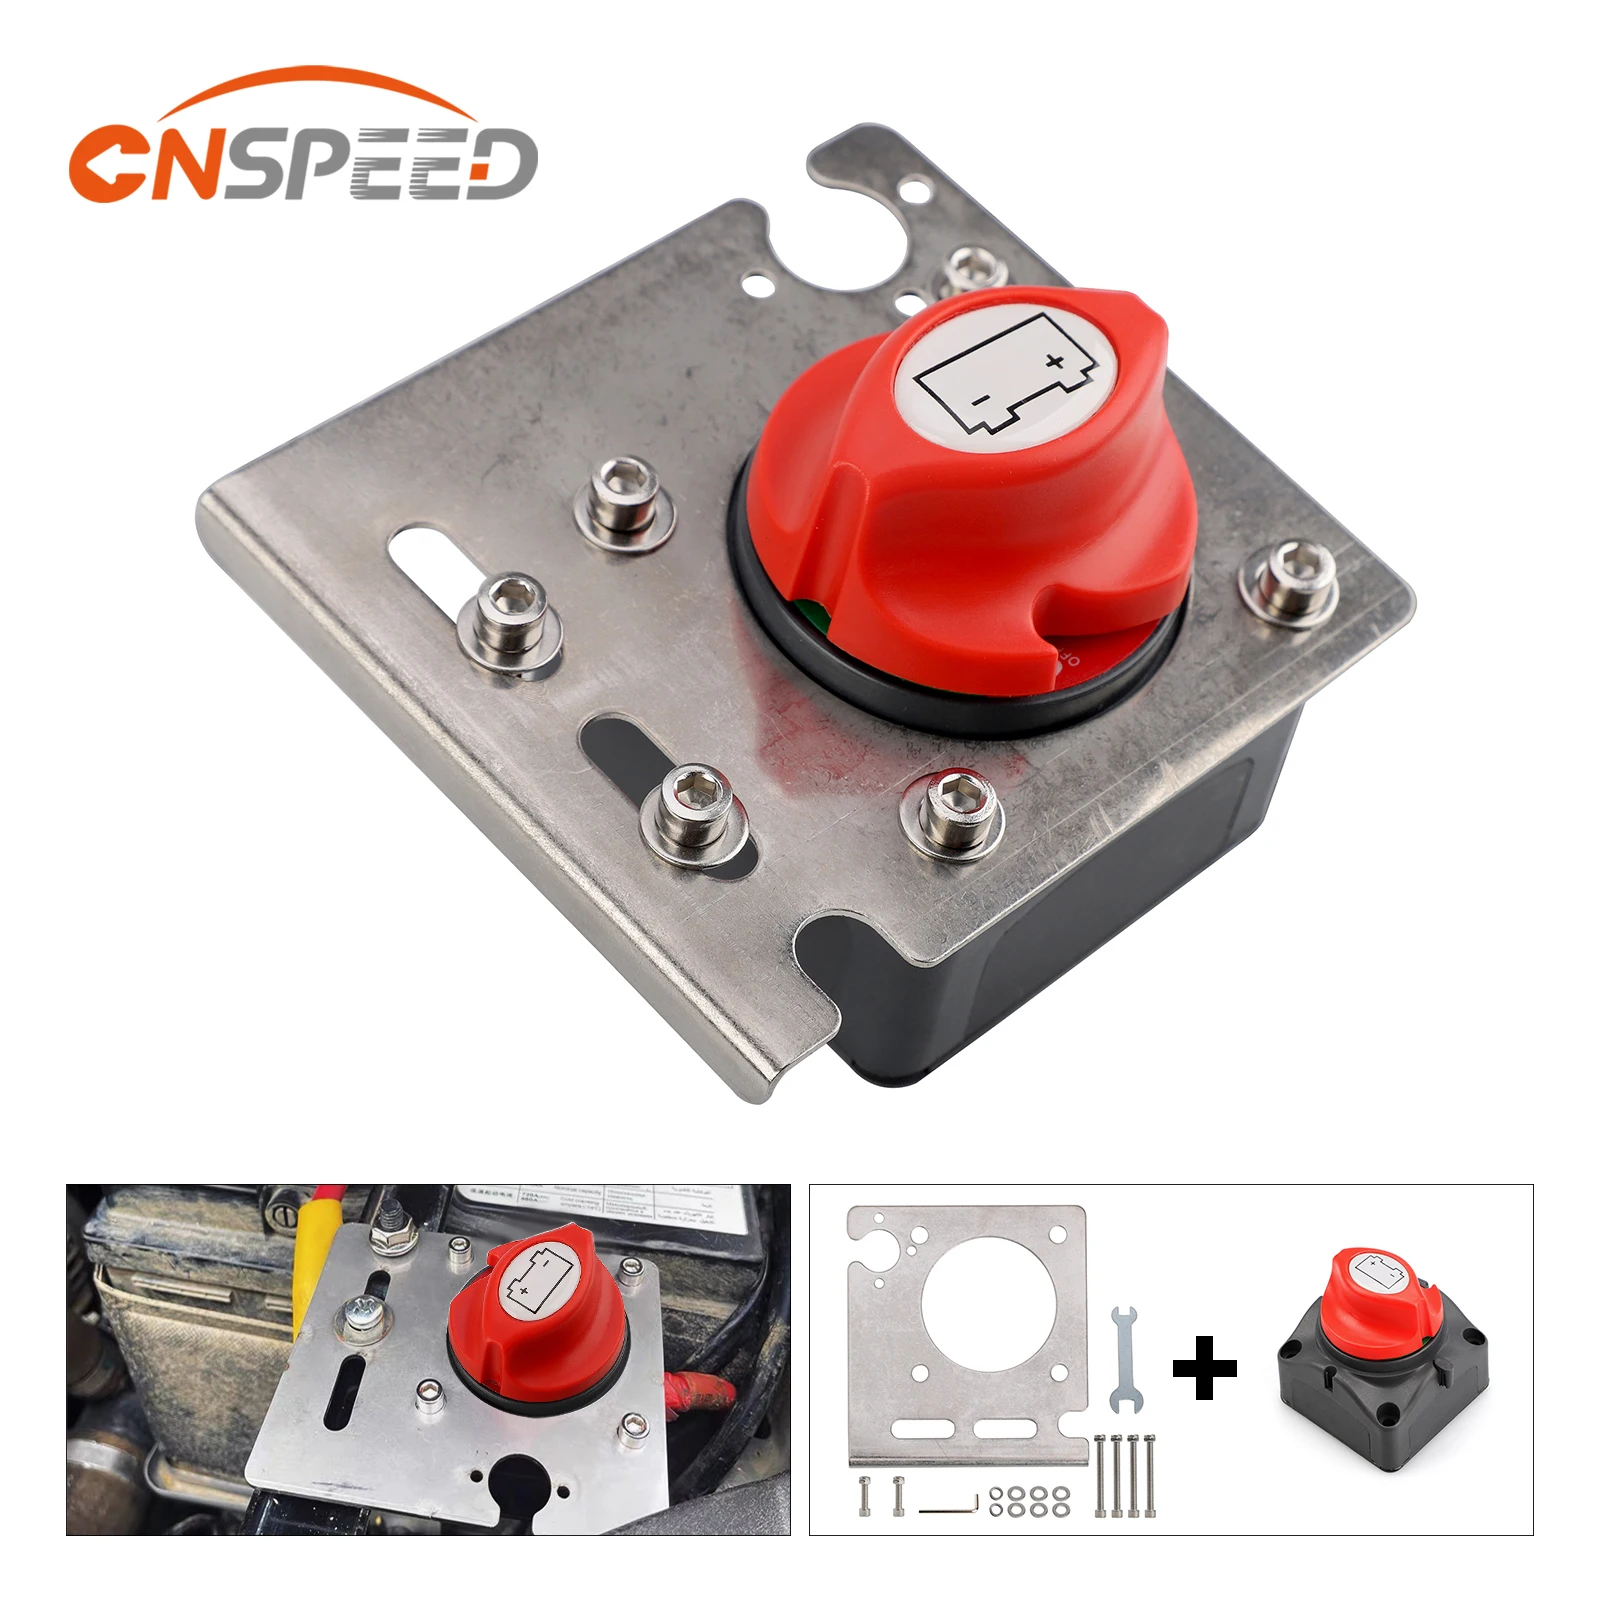 

Car RV Boat Marine Battery Selector Isolator Disconnect Switch Rotary Cut Battery Circuit Cutter (On/Off) DC 12V-60V 100A-300A